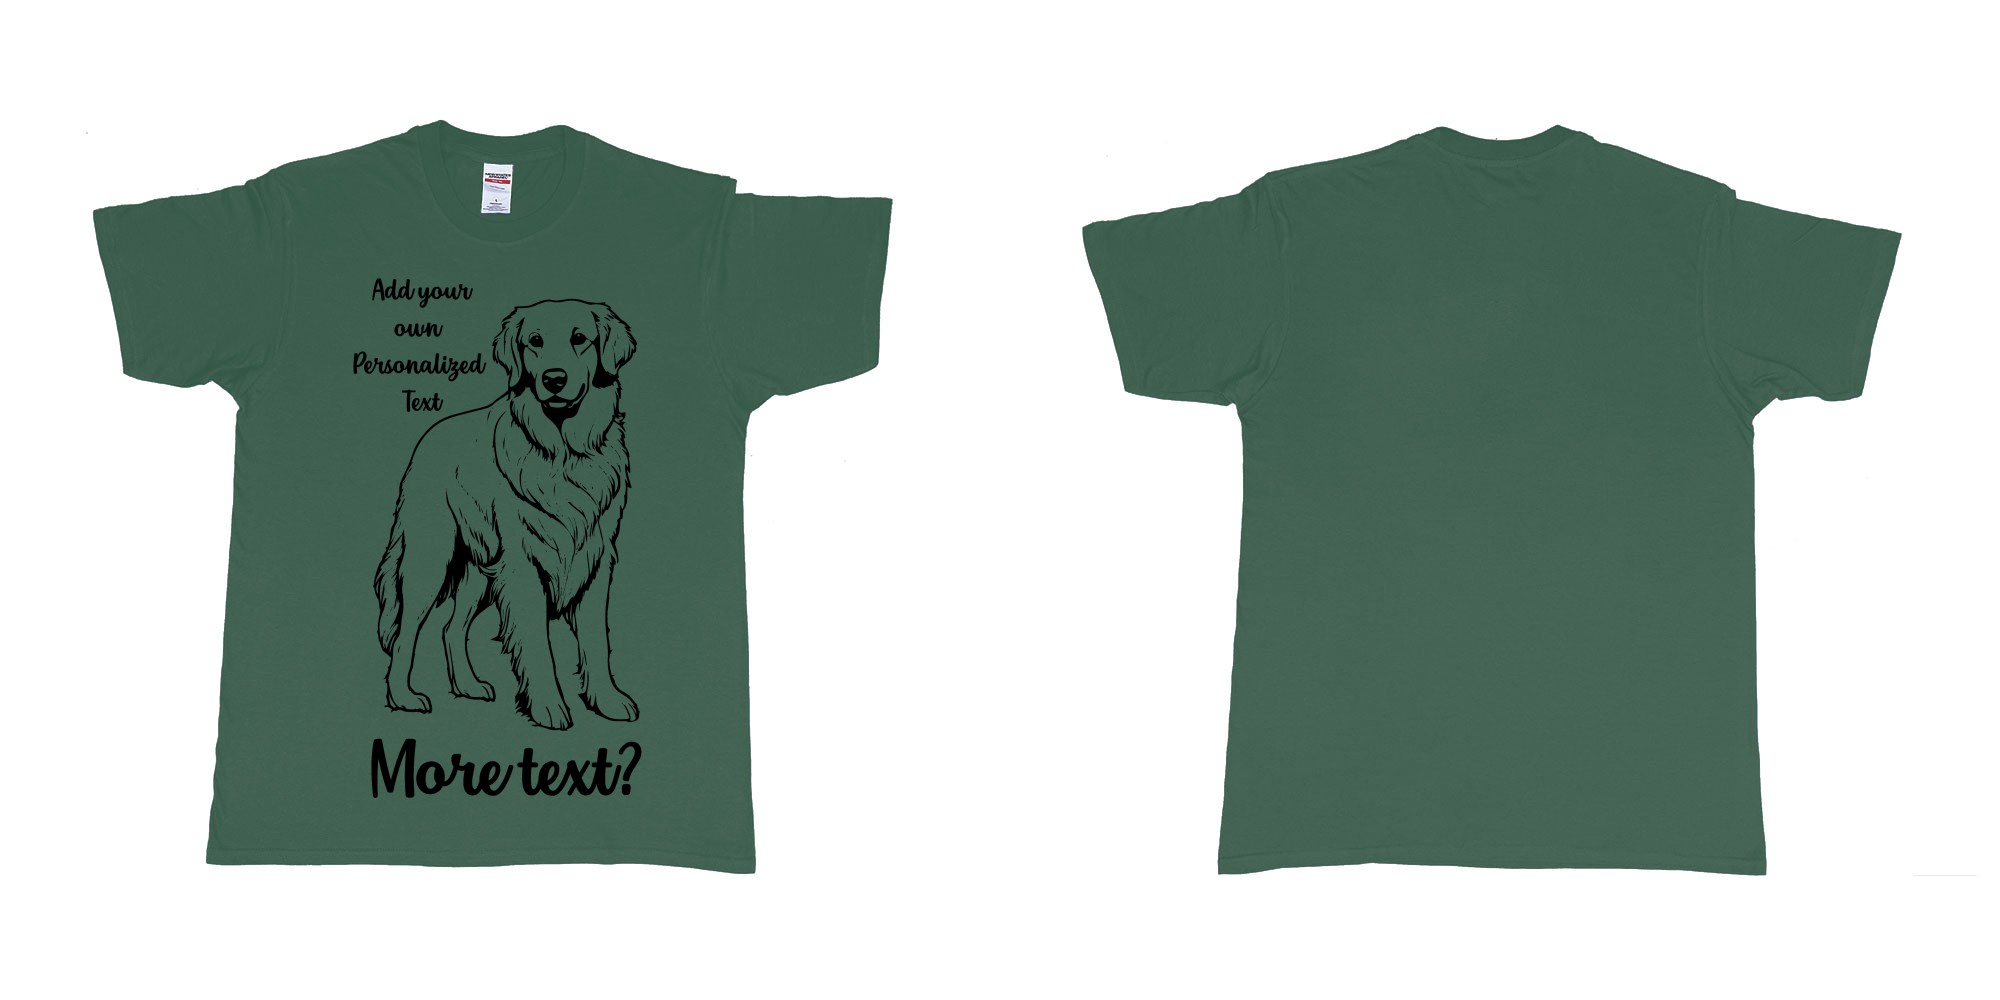 Custom tshirt design golden retriever dog breed personalized text in fabric color forest-green choice your own text made in Bali by The Pirate Way